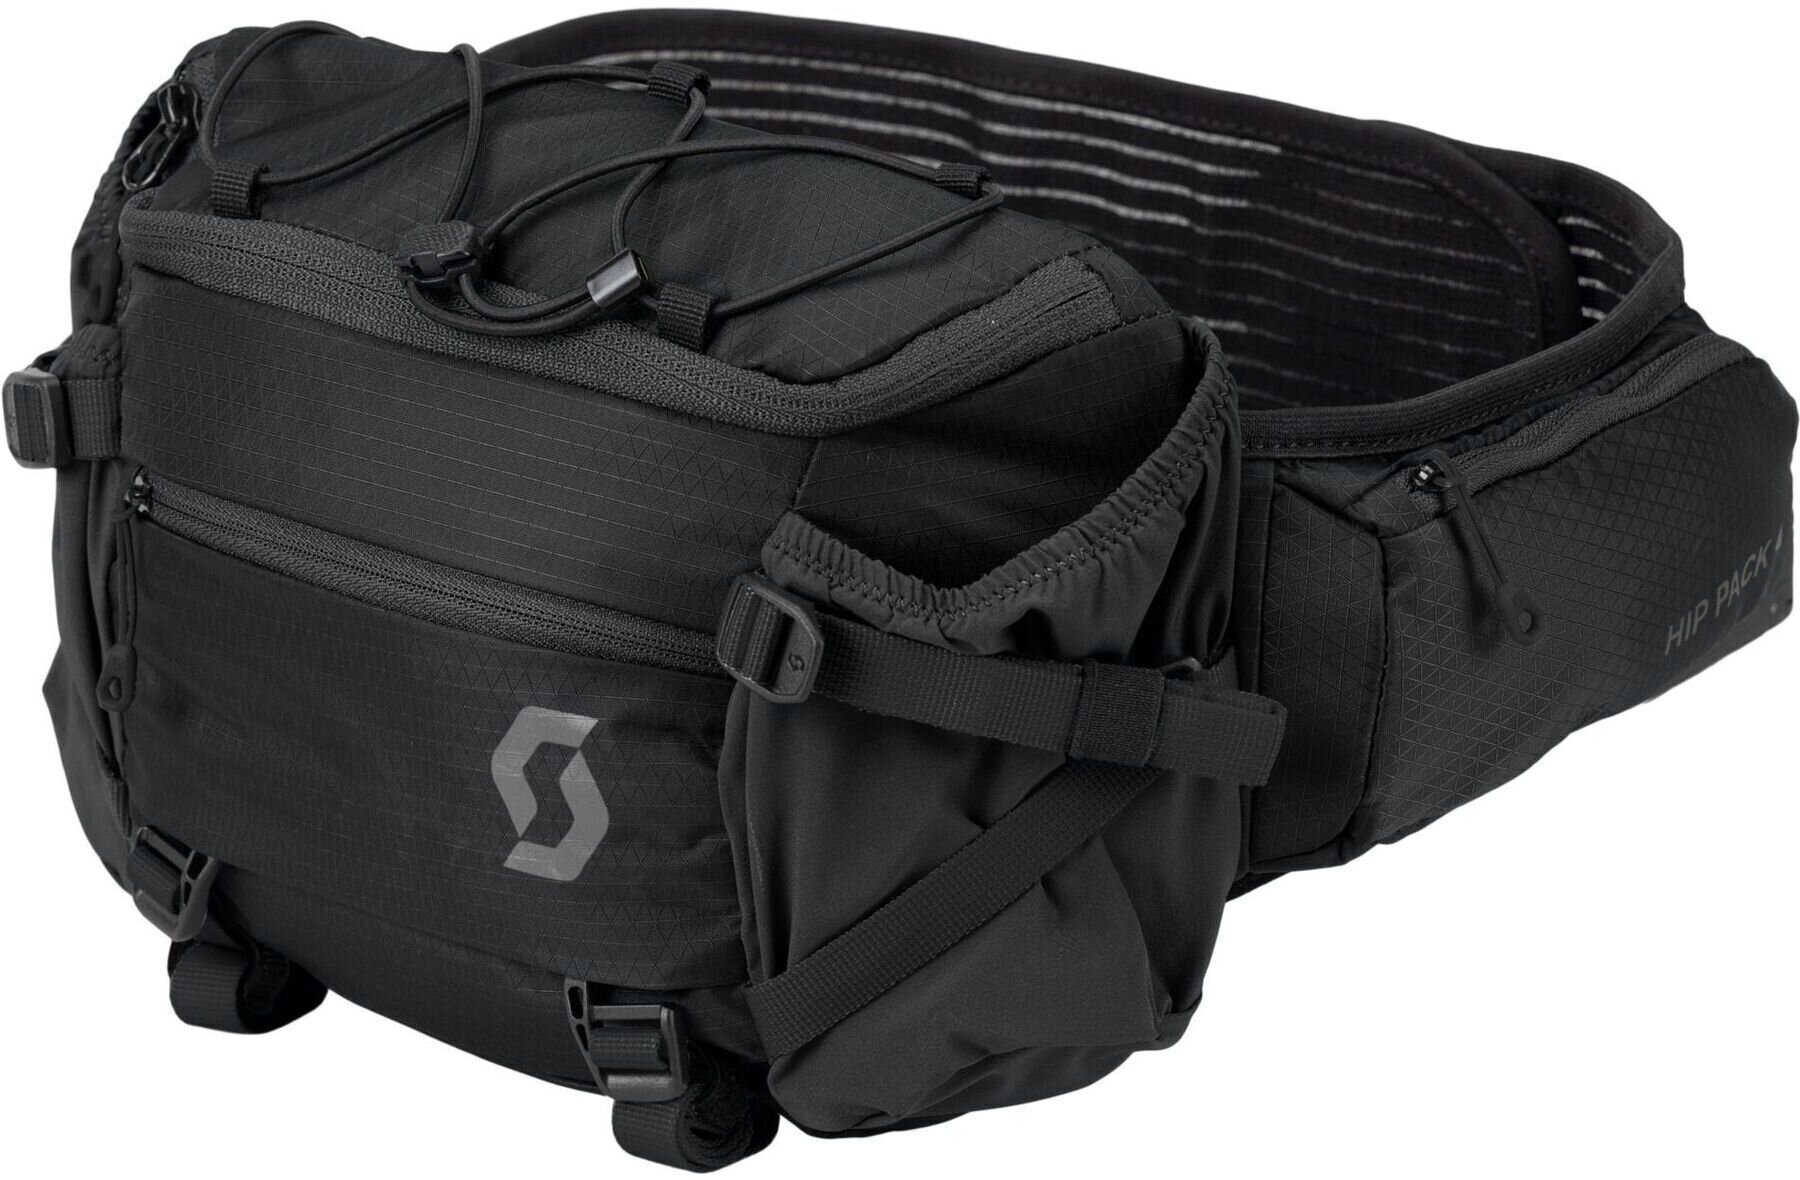 Cycling backpack and accessories Scott Trail 4 Hip Pack Black Waistbag